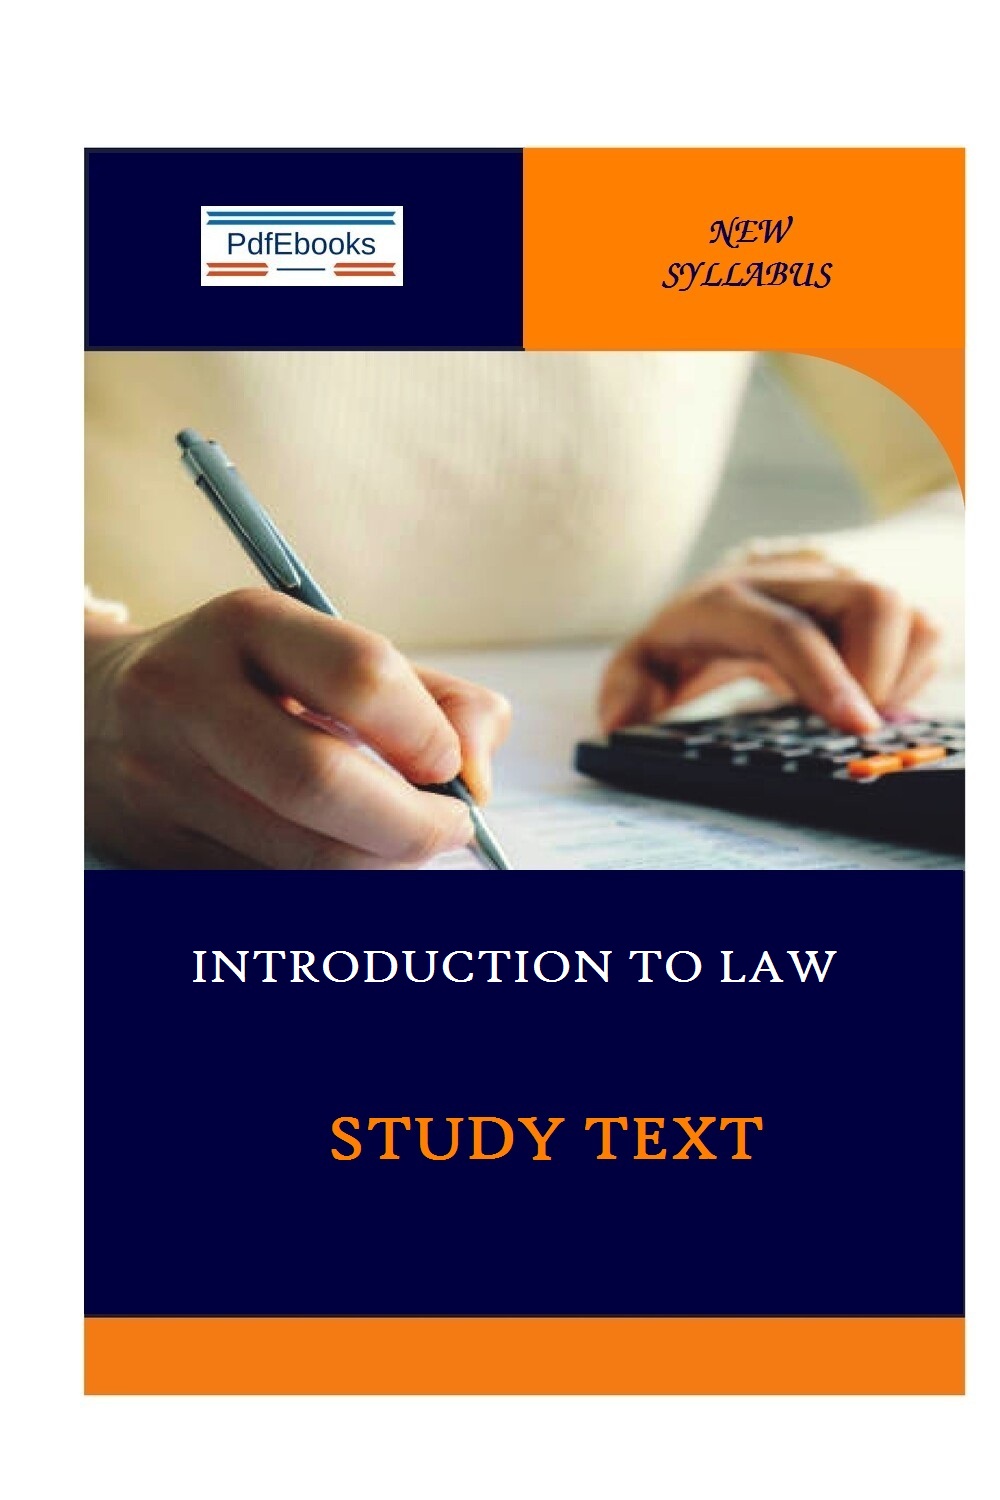 Introduction to Law CPA PDF Study text notes